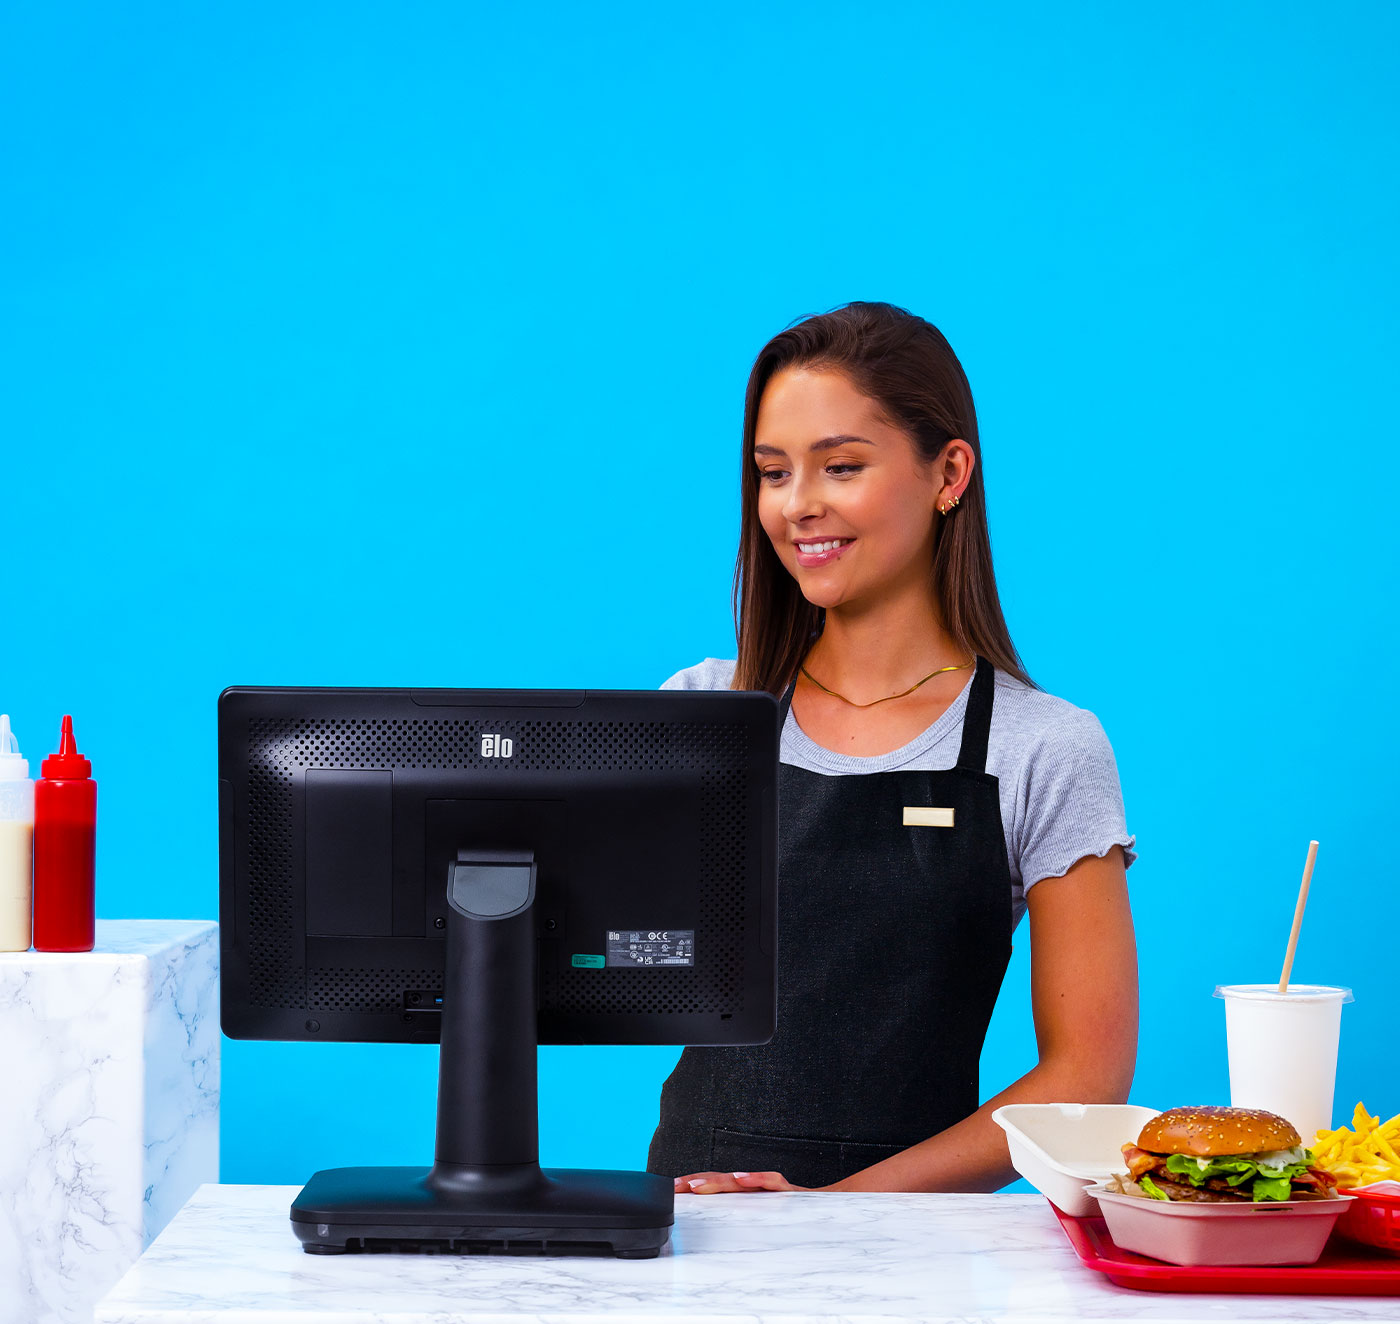 Image of restaurant POS system